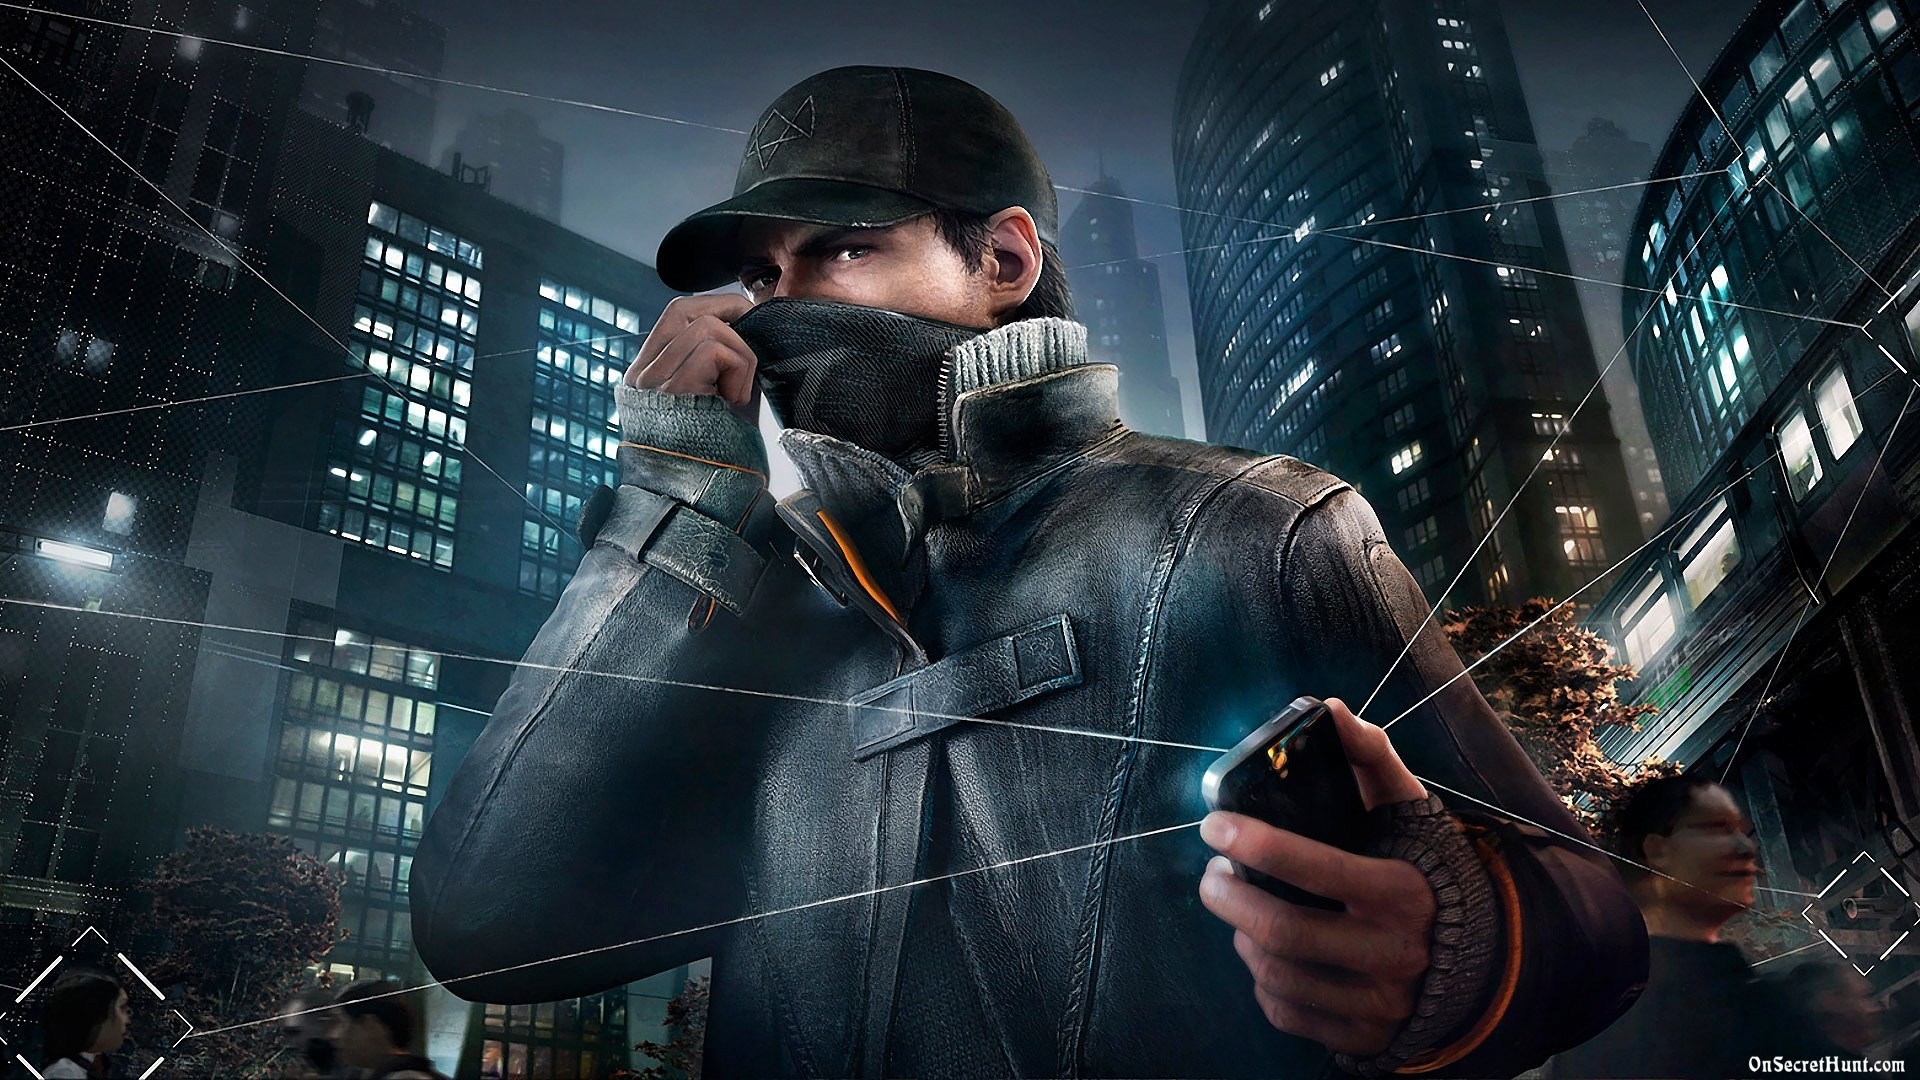 1920x1080 Aiden Pearce Watch Dogs WallpaperImagesPicturesPhotosHD Wallpapers 